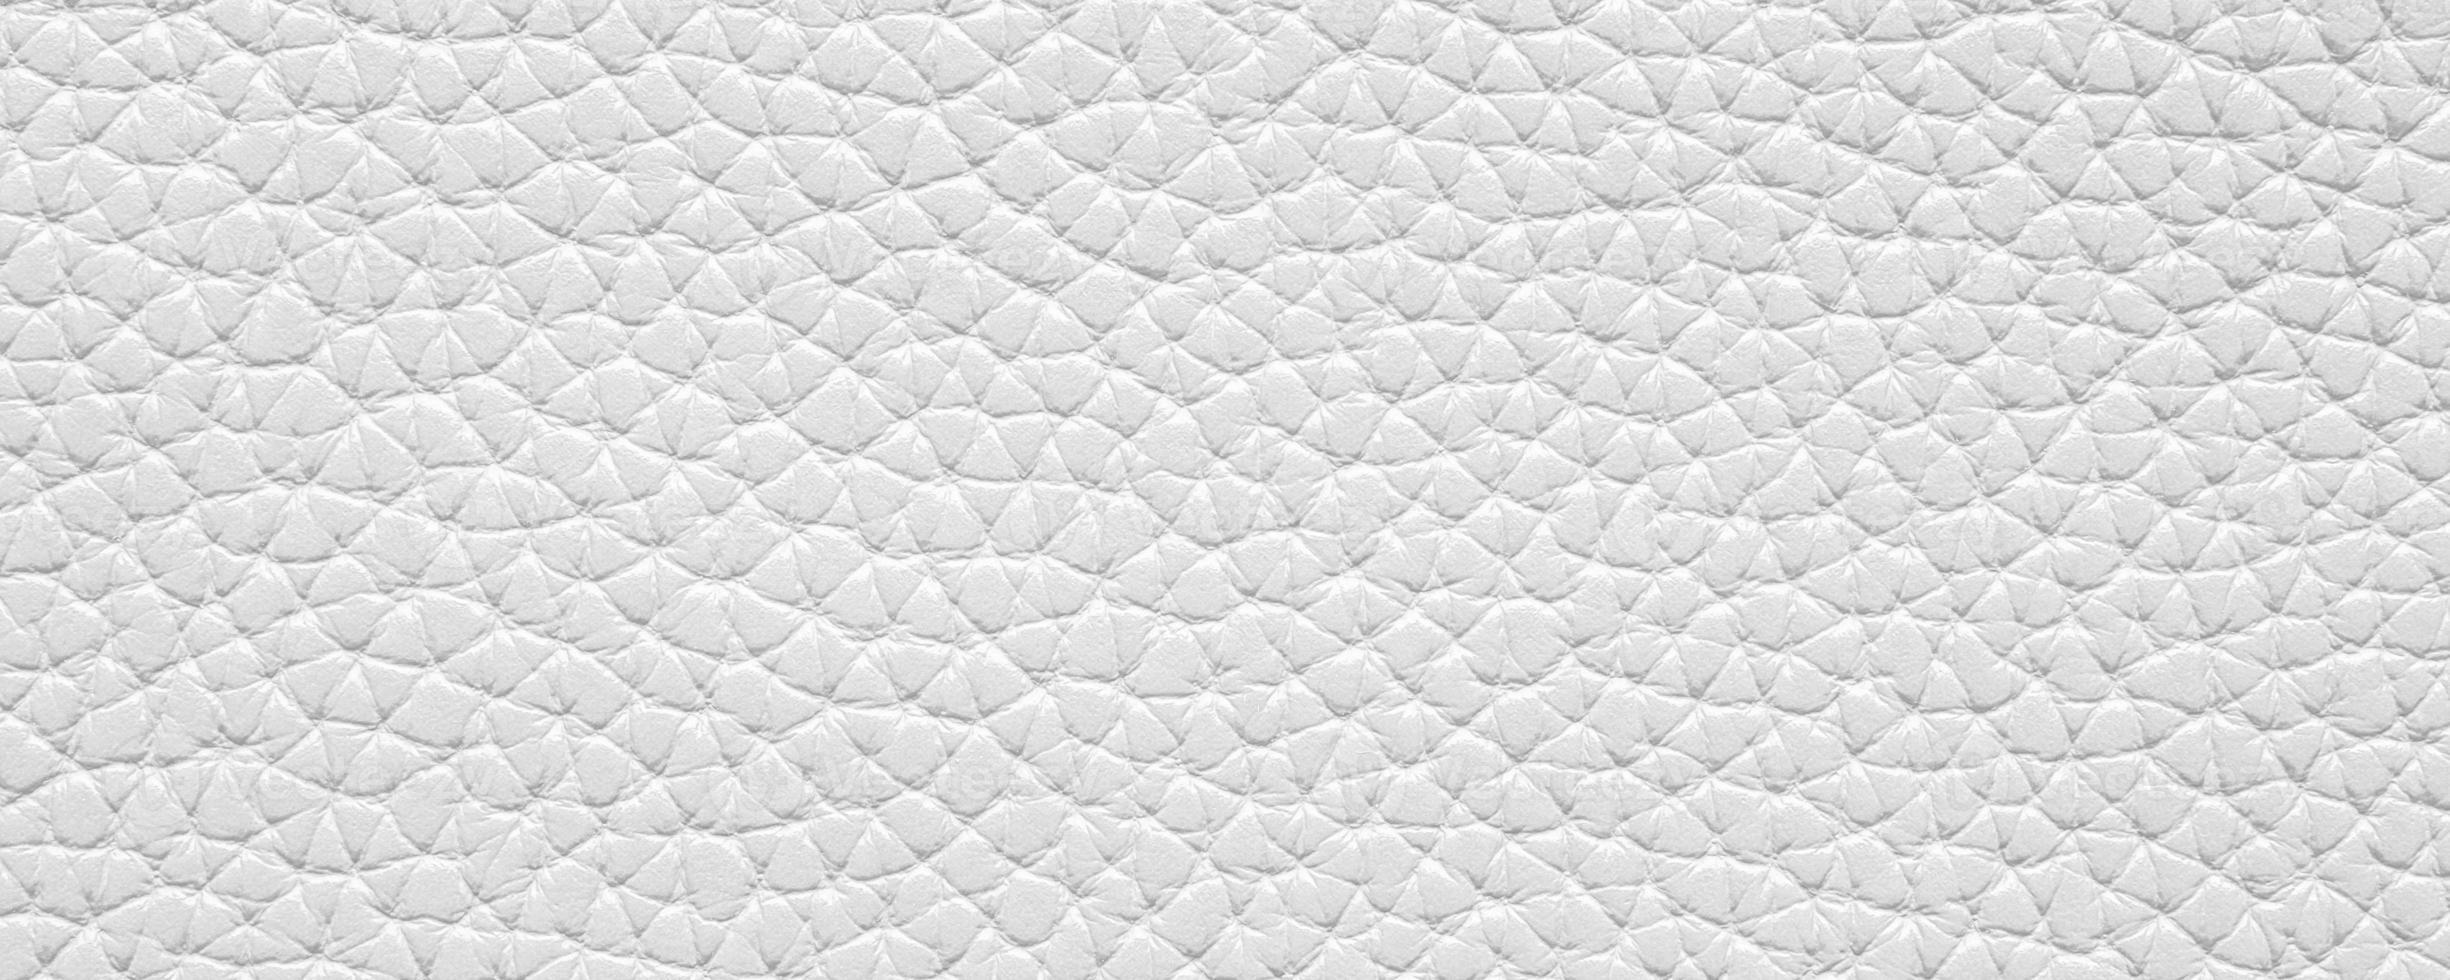 White leather texture luxury background 12968222 Stock Photo at